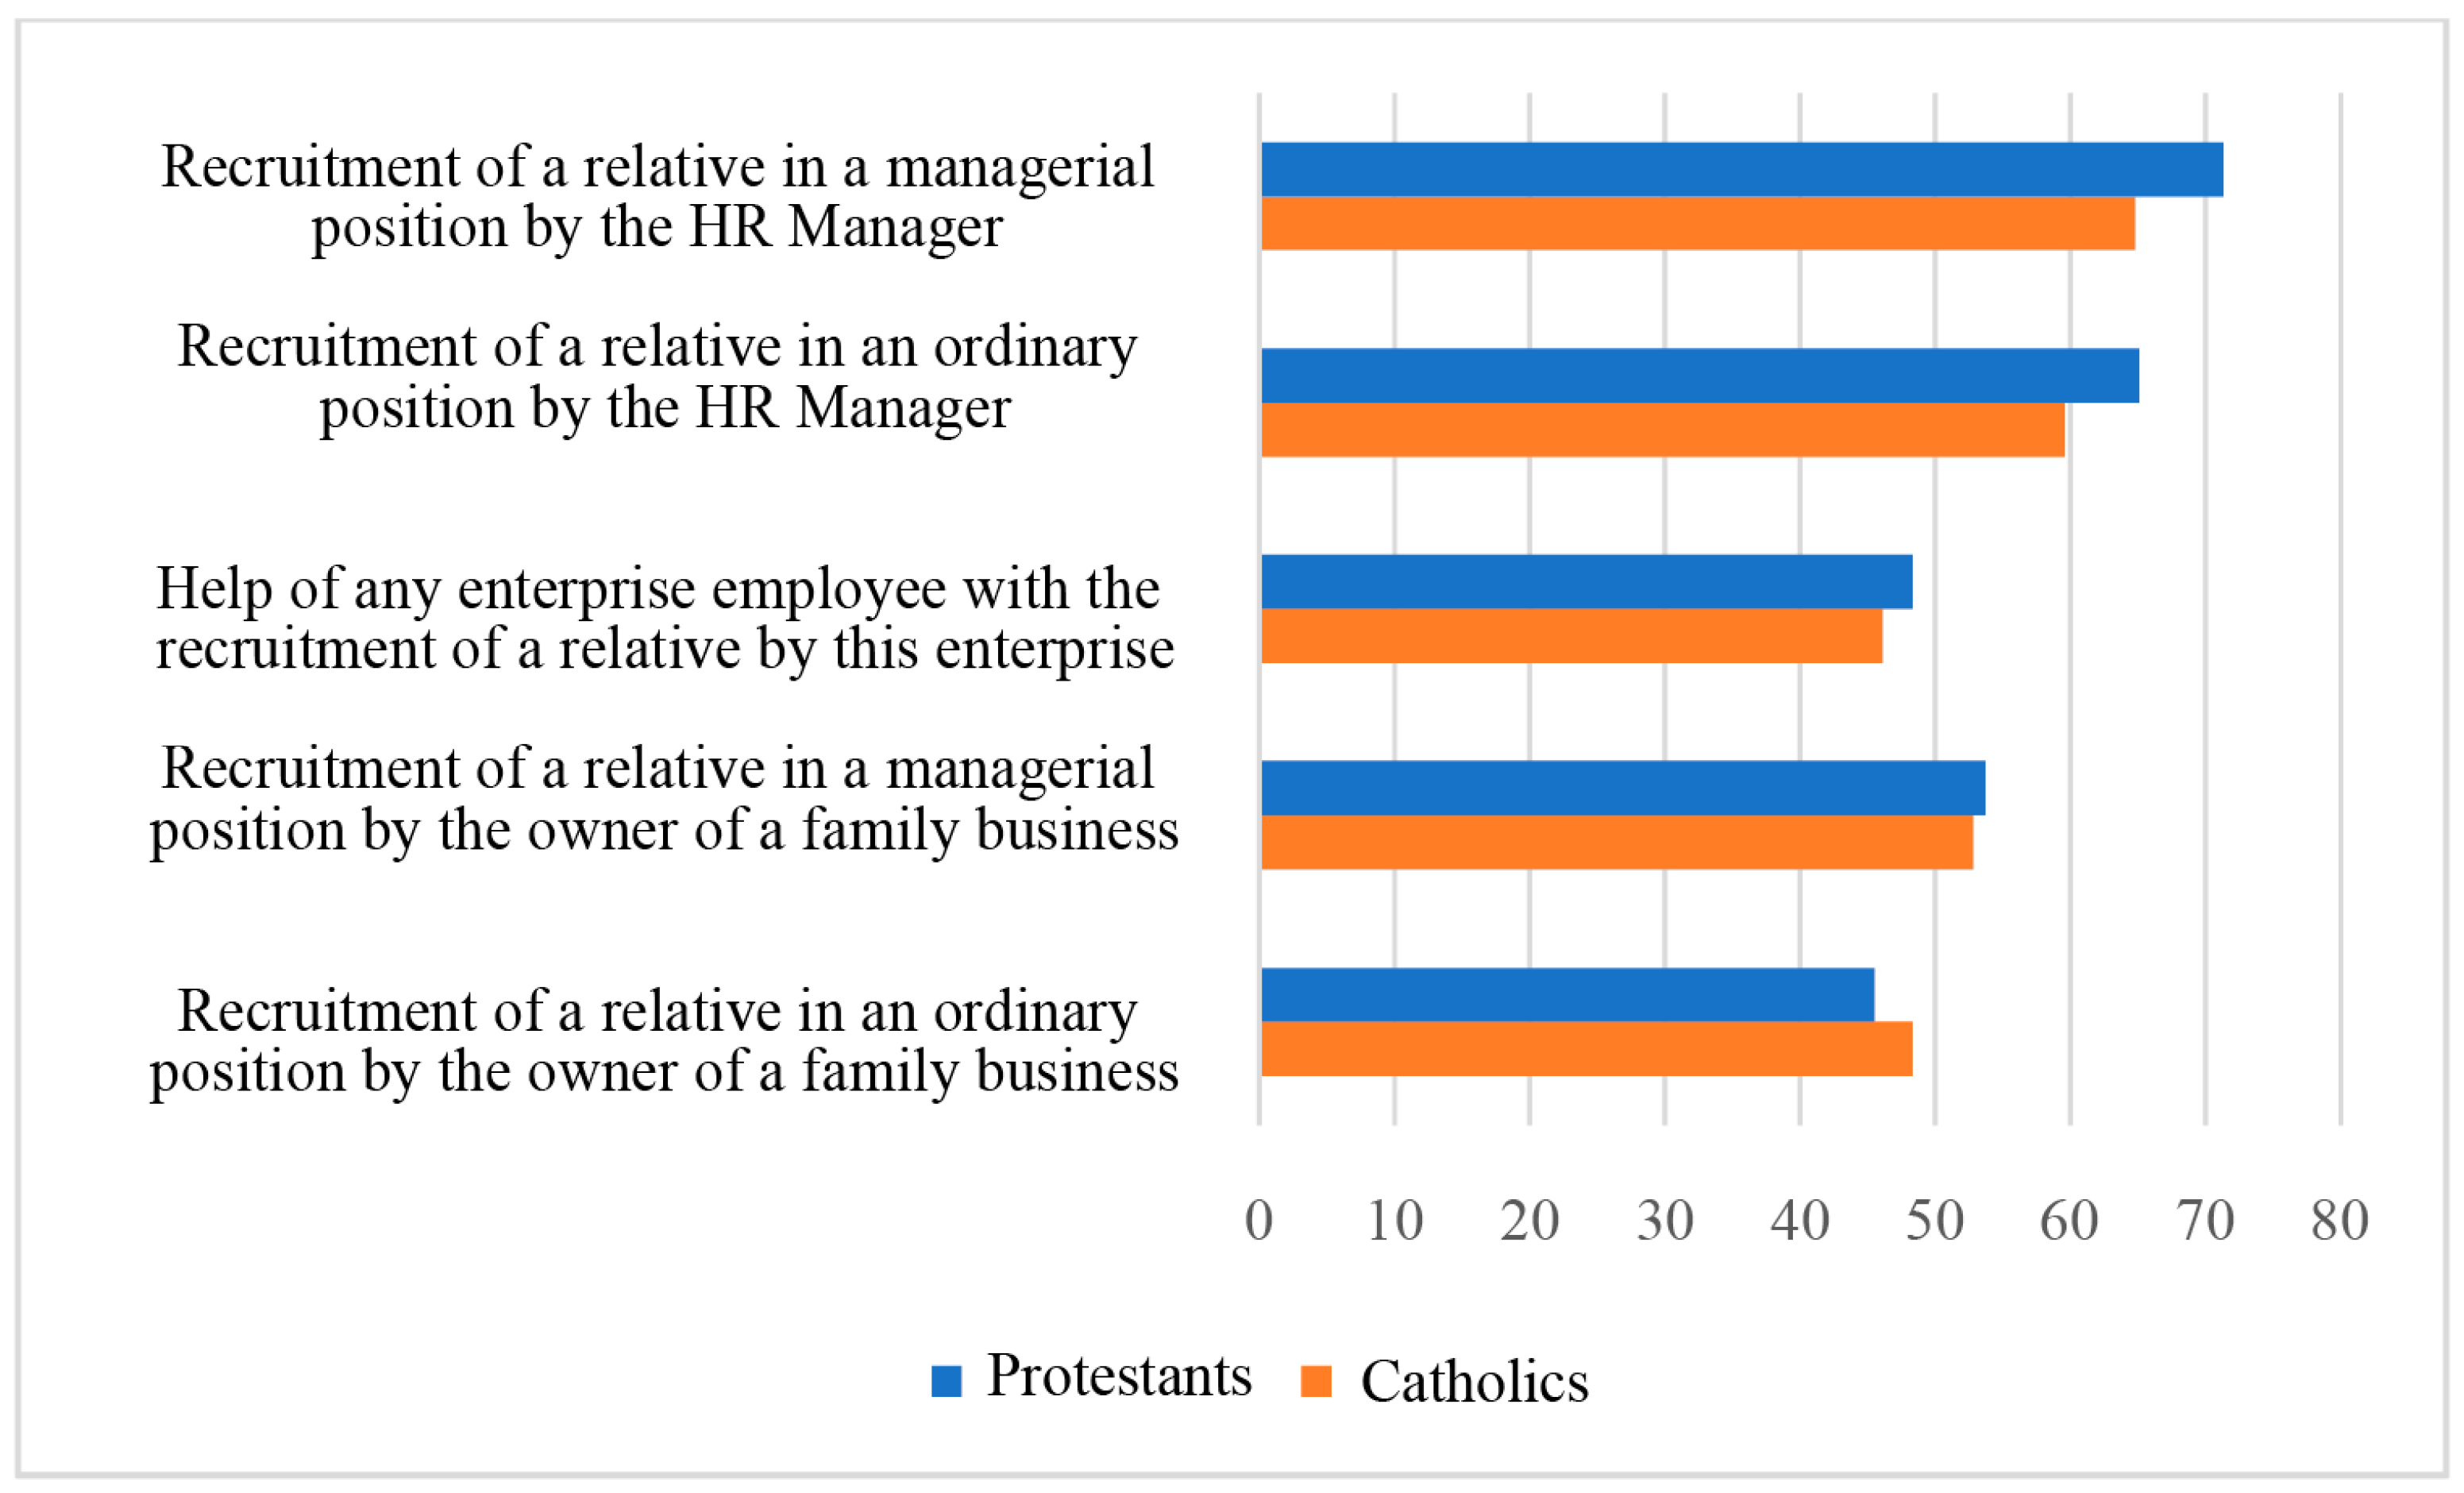 Religions Free Full Text The Perception Of Organisational Nepotism Depending On The Membership In Selected Christian Churches Html